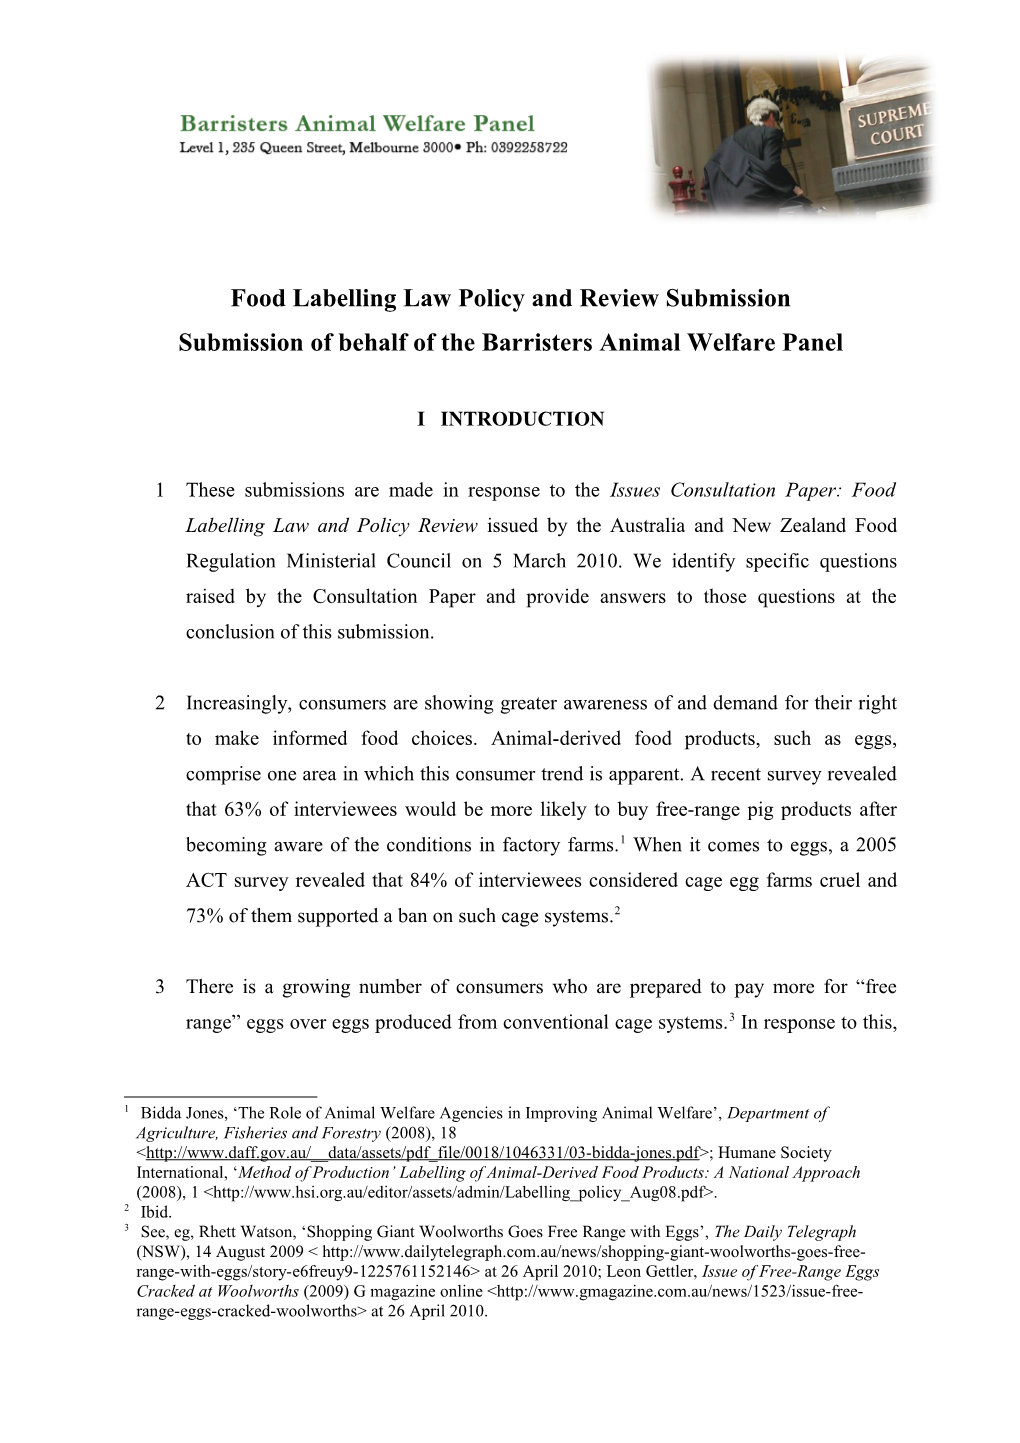 Food Labelling Law Policy and Review Submission